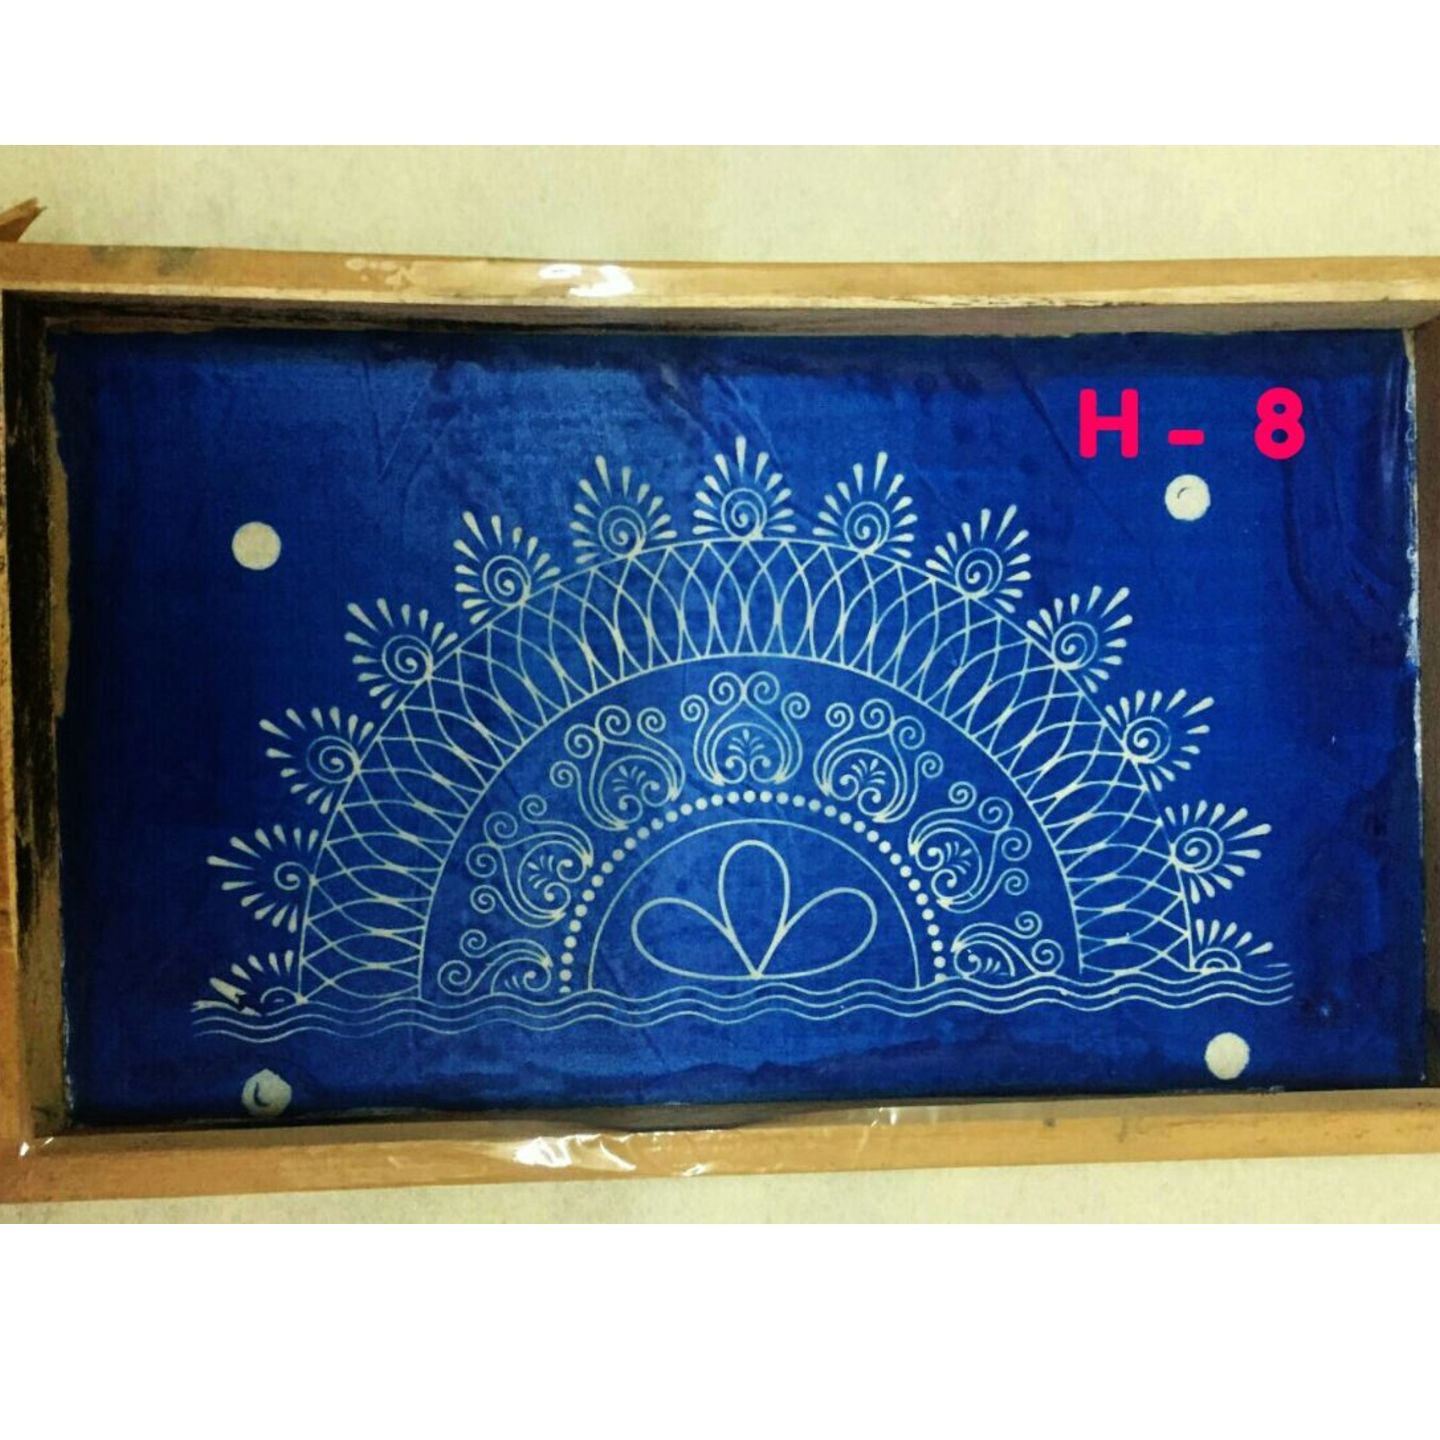 MeArtist wooden Rangoli stencils of half circle 12 by inch H - 8